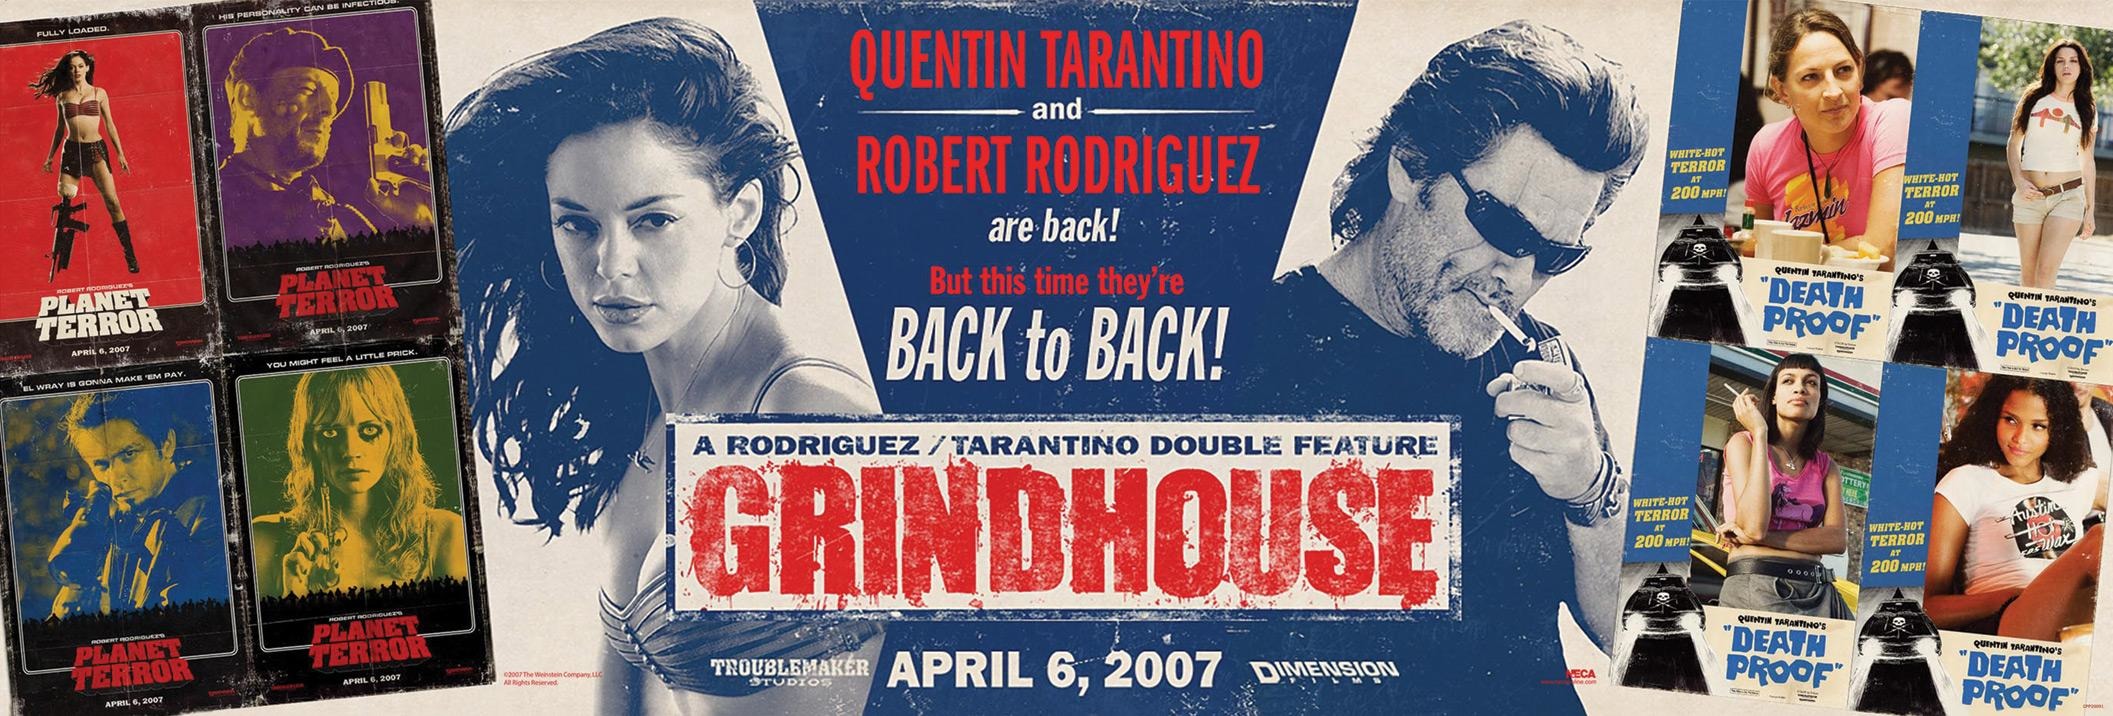 Mega Sized Movie Poster Image for Grindhouse (#4 of 24)